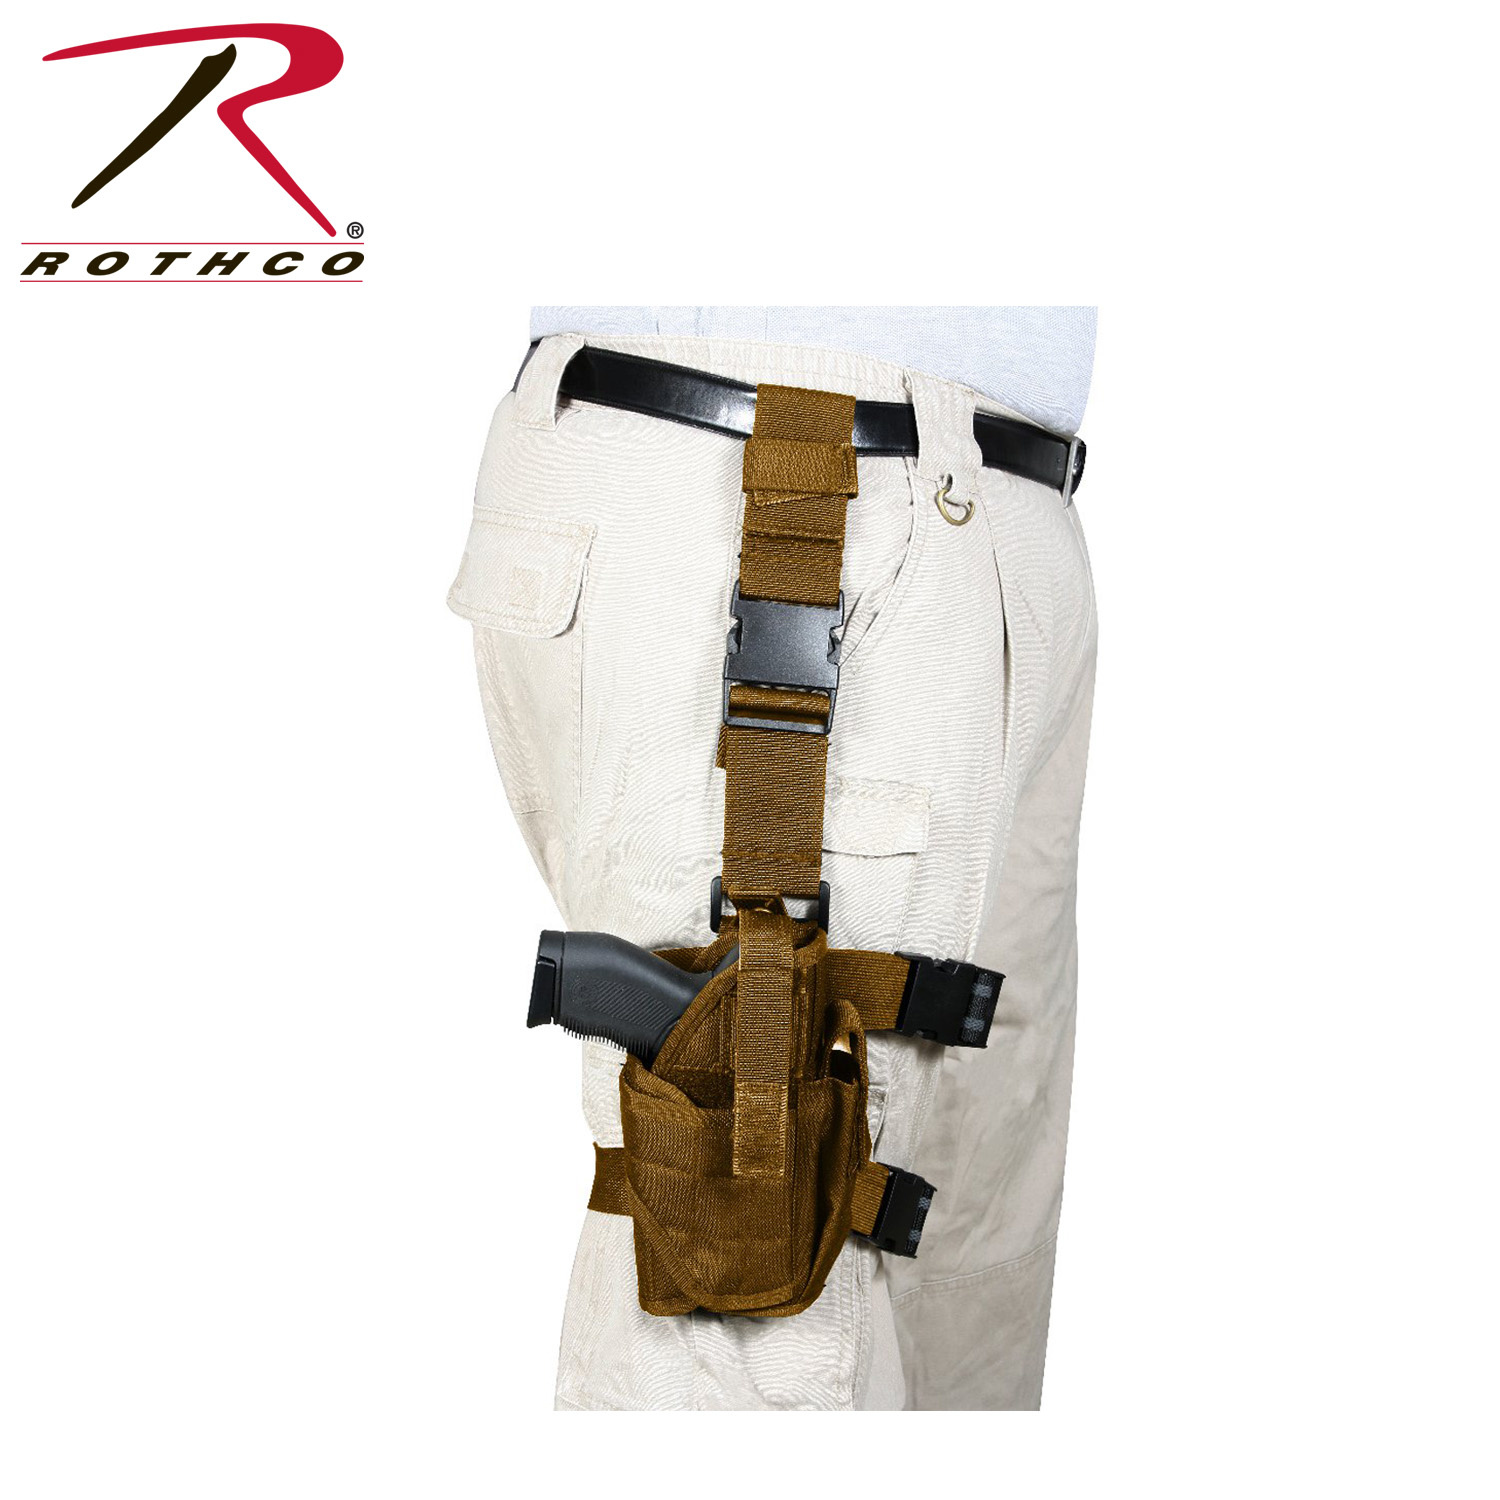 Rothco Deluxe Drop Leg Holster